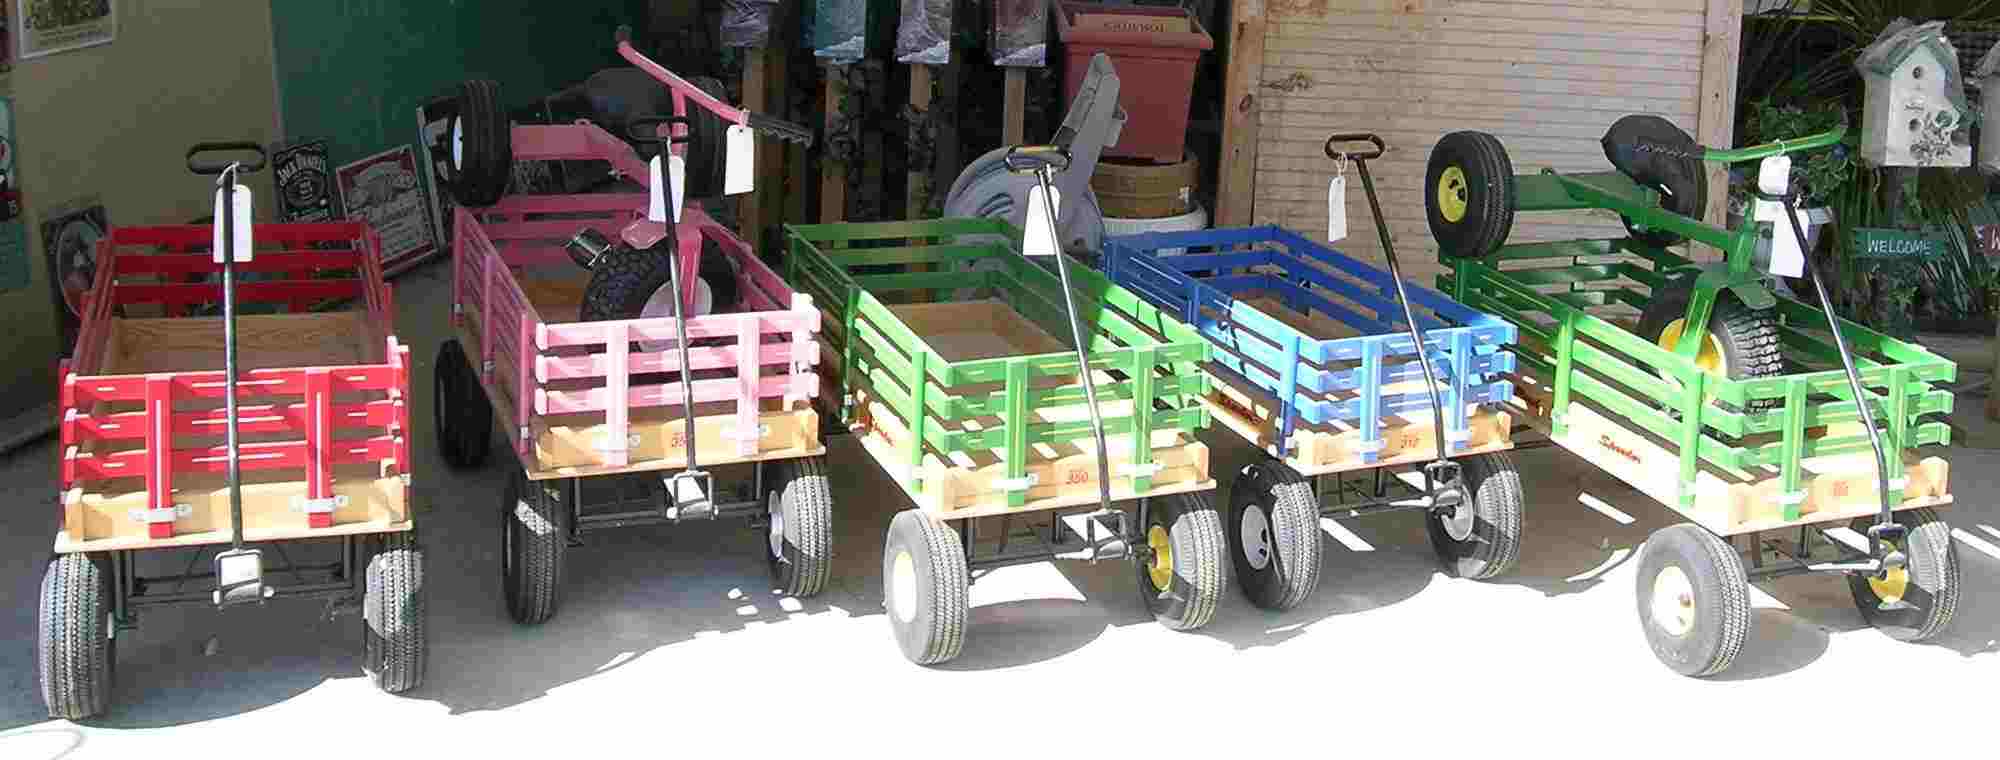 5 Valley Speeder Wagons, 2 with tricycles inside.